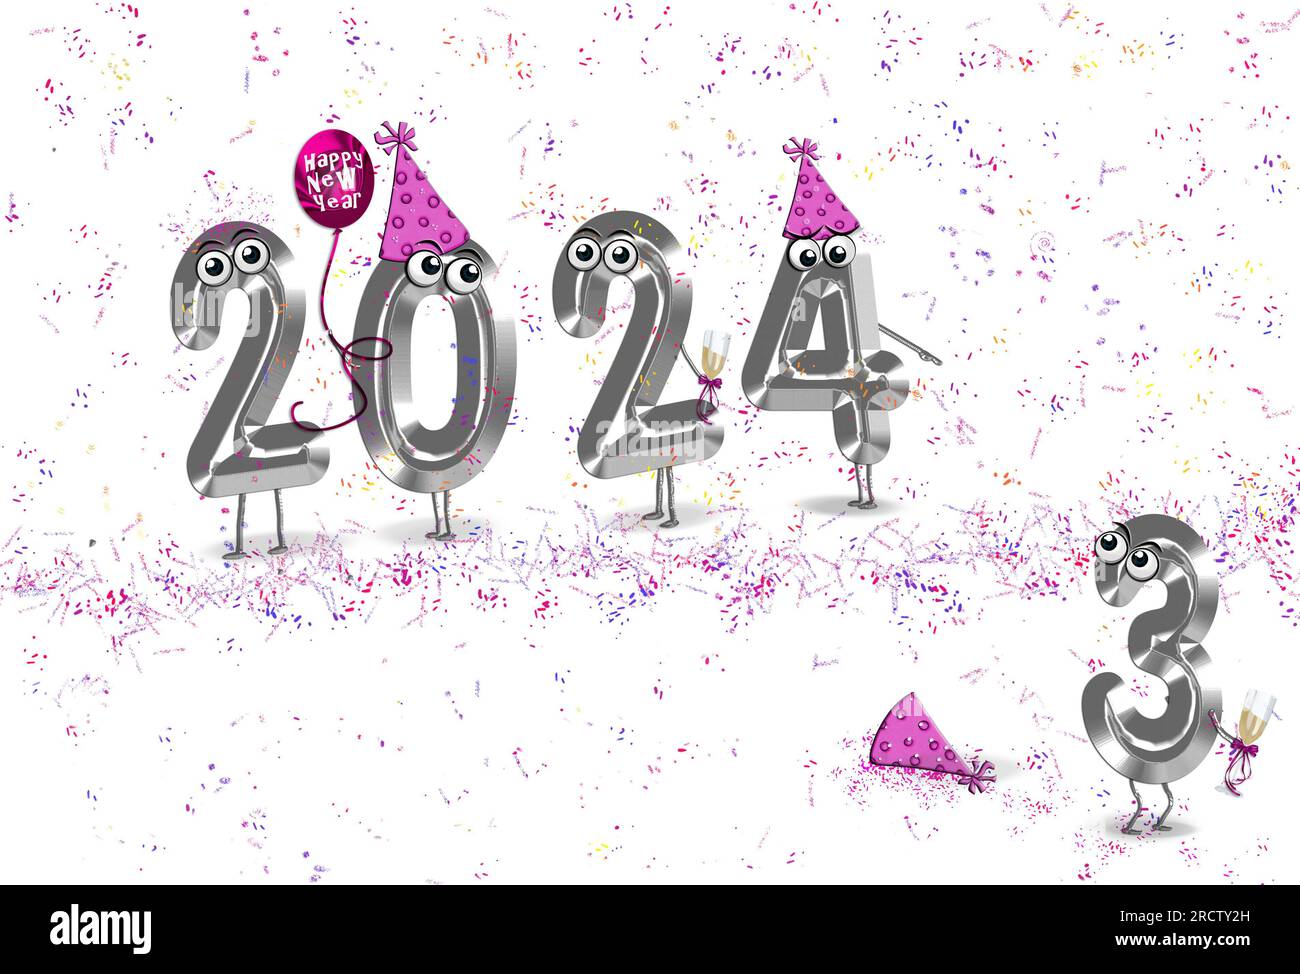 New Year 2024 humorous illustration with pink party hats and confetti Stock Photo